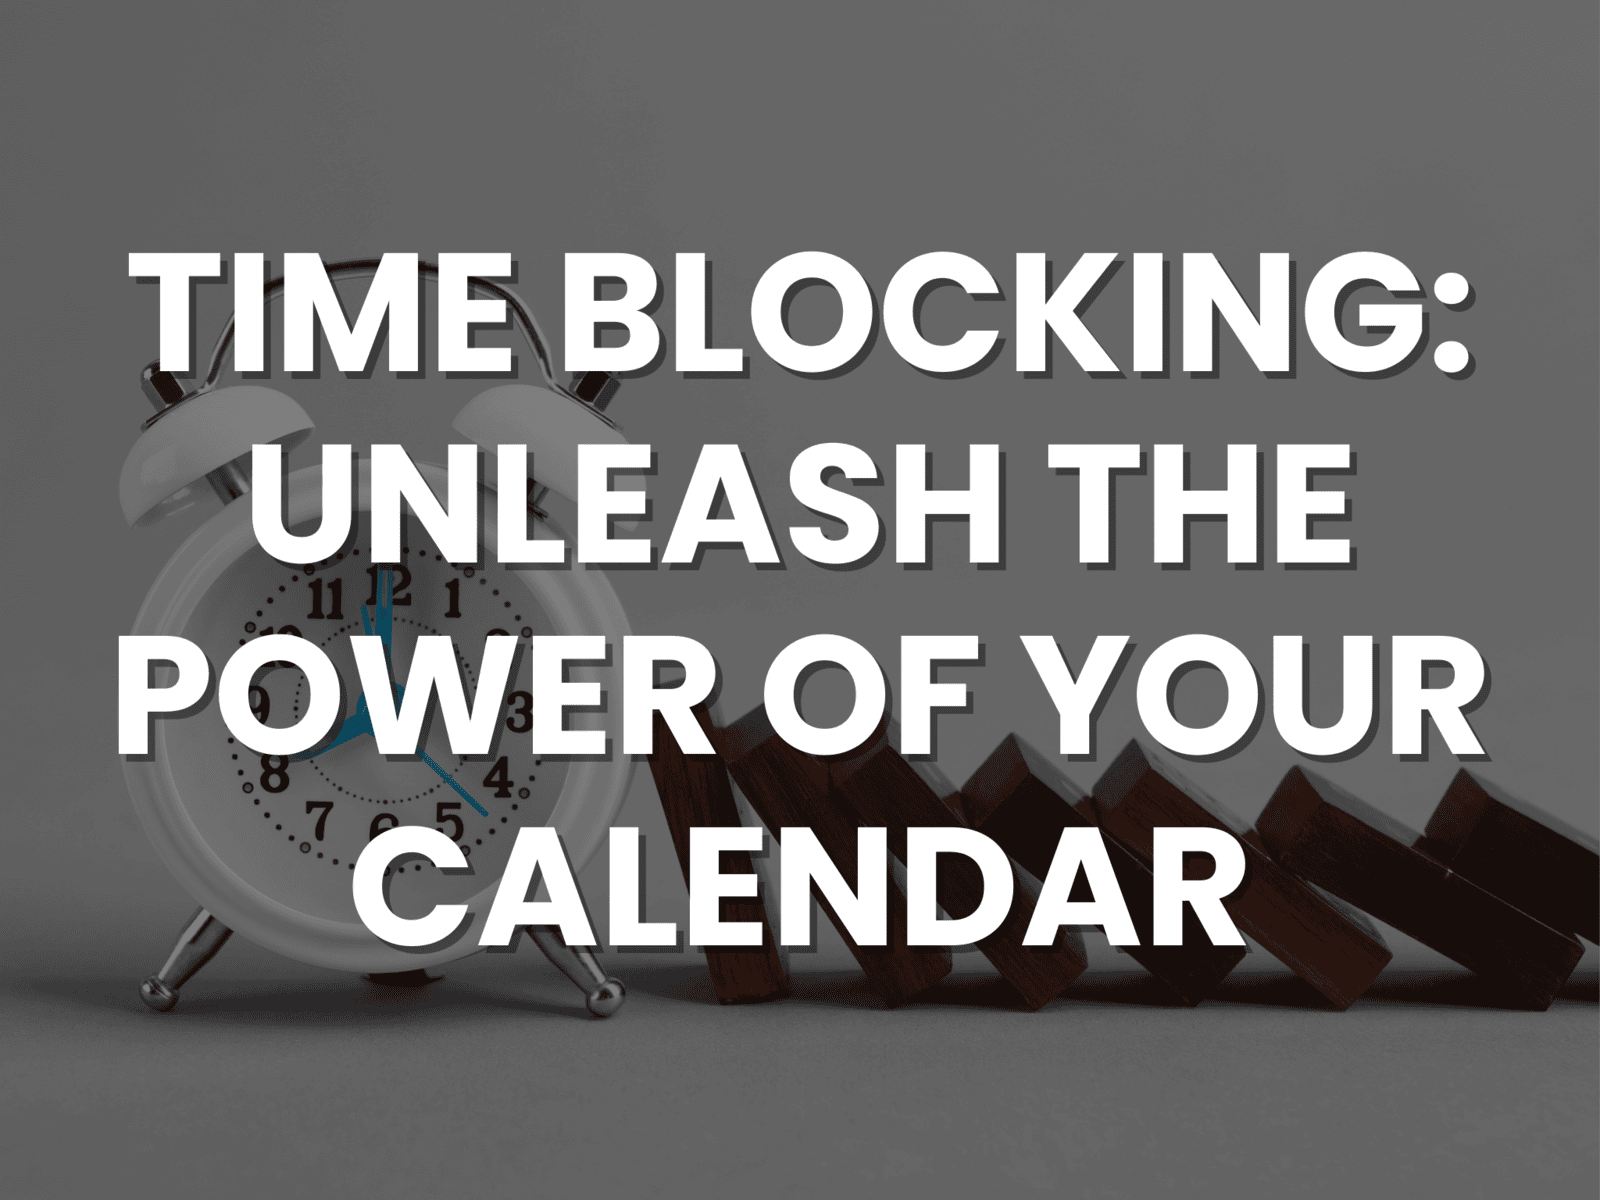 Time Blocking: Unleash the Power of Your Calendar